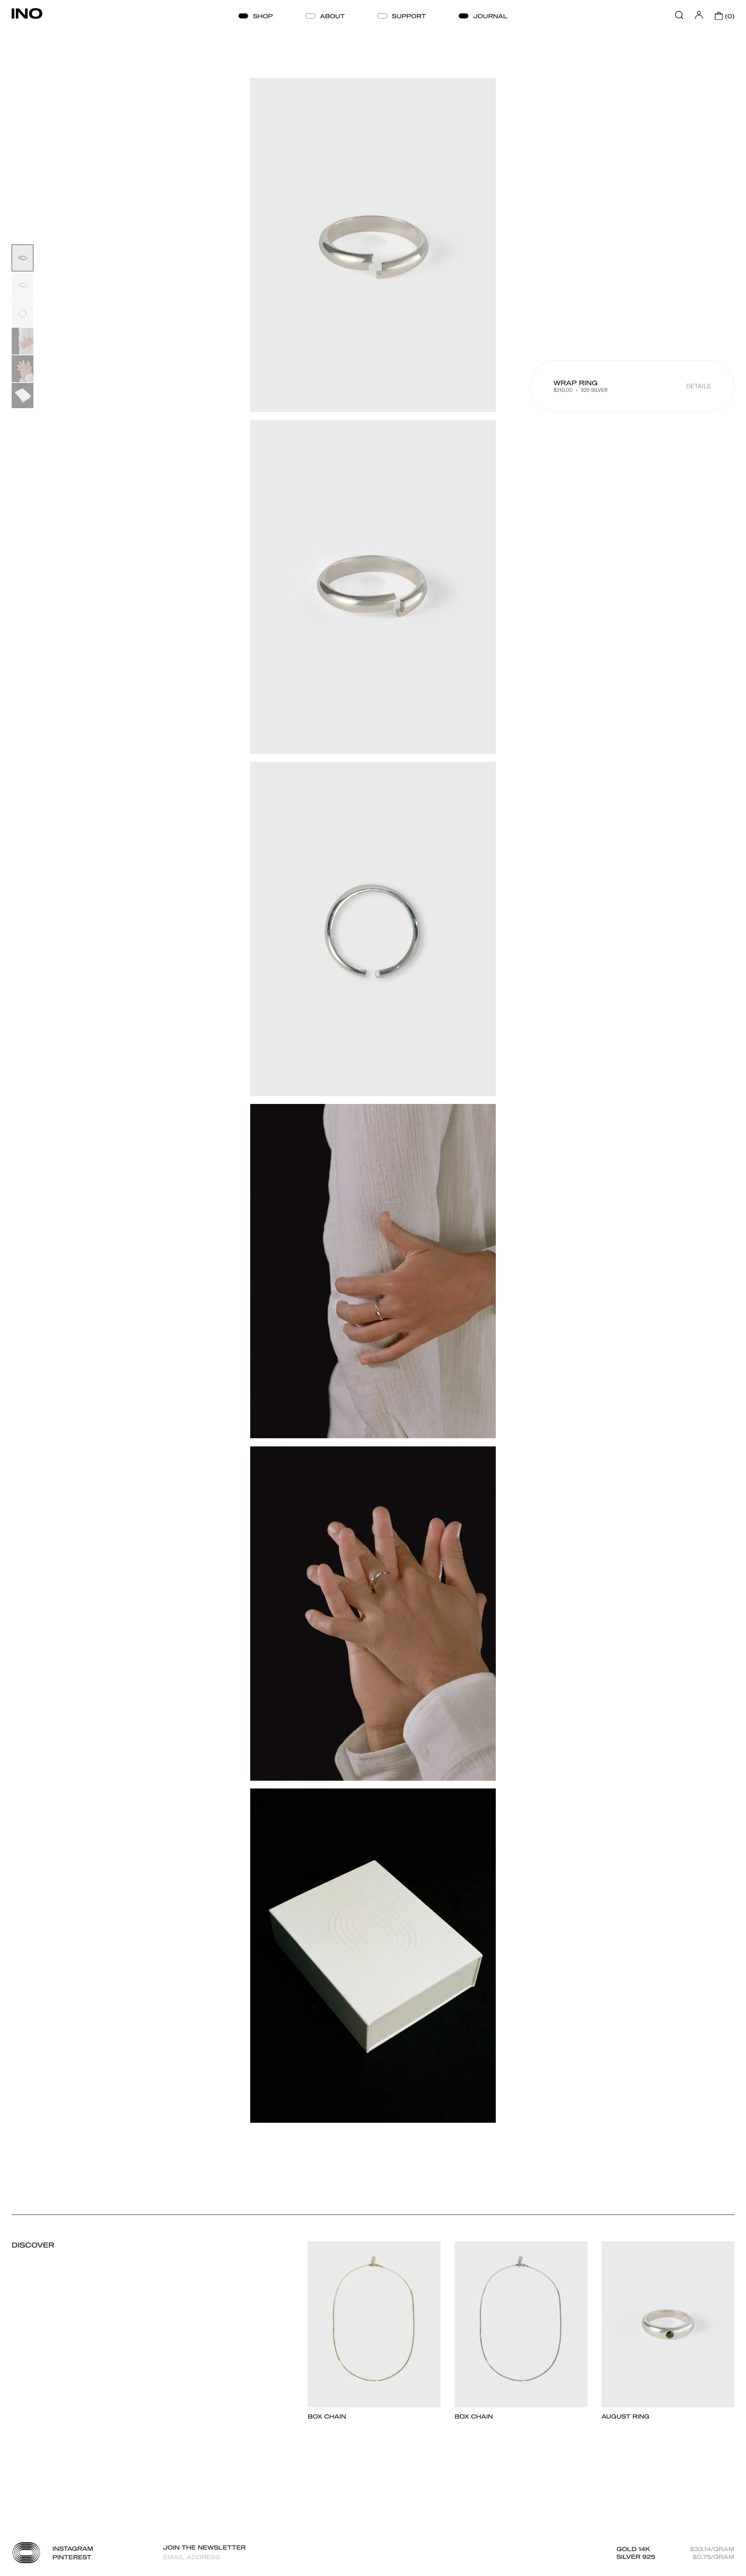 INO Jewelry Landing Page Example: Discover our collection of gender neutral jewelry crafted in 925 sterling silver and solid 14k gold. Necklaces, rings, bracelets for both men and women. Handmade in Los Angeles. Enjoy free shipping worldwide.